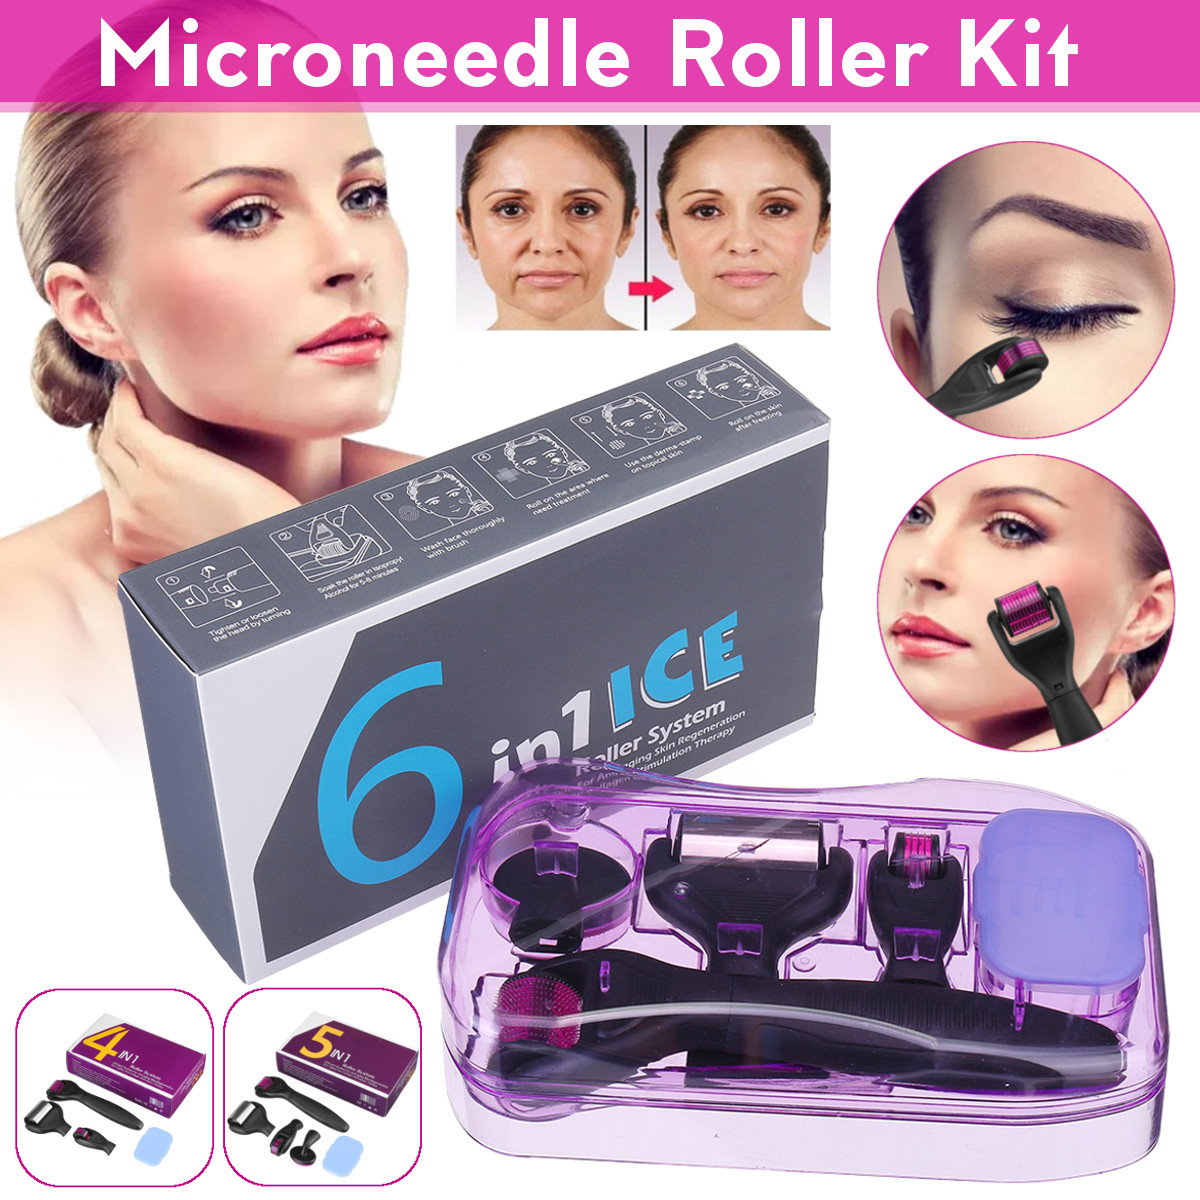 Microneedle-Micro-Needle-Roller-Kit-Therapy-Skin-Care-05-20mm-Anti-aging-Acne-1820421-1